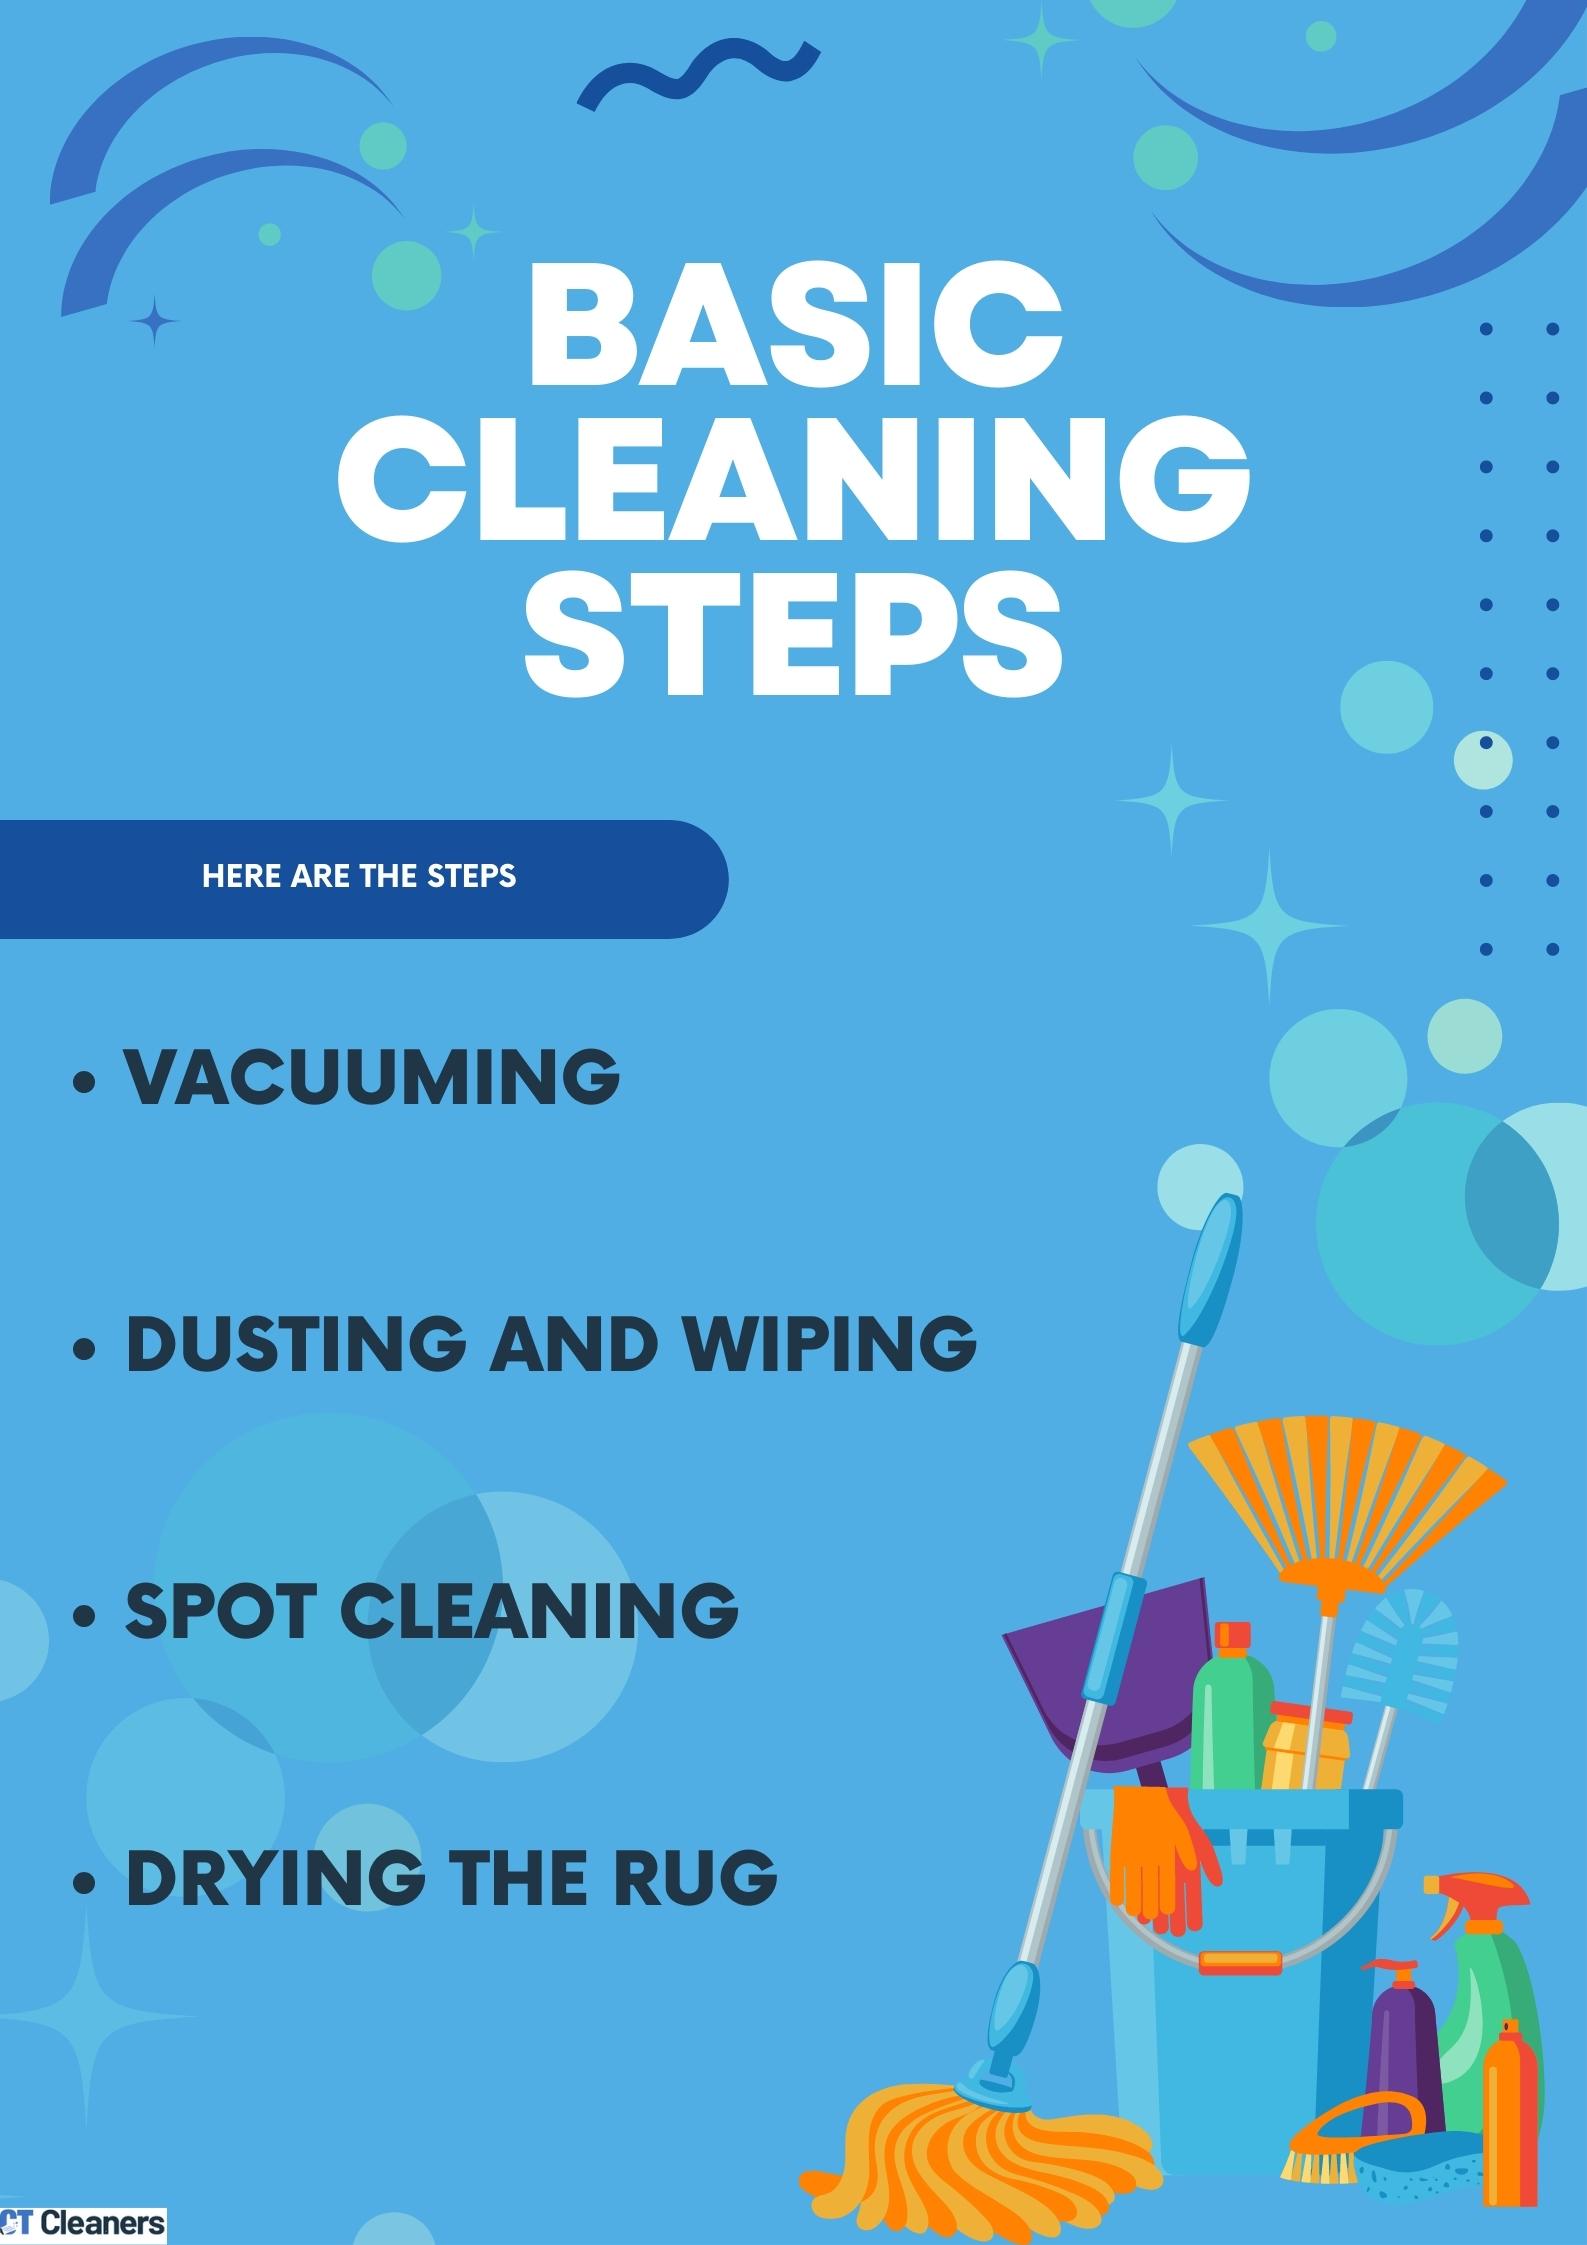 Basic Cleaning Steps